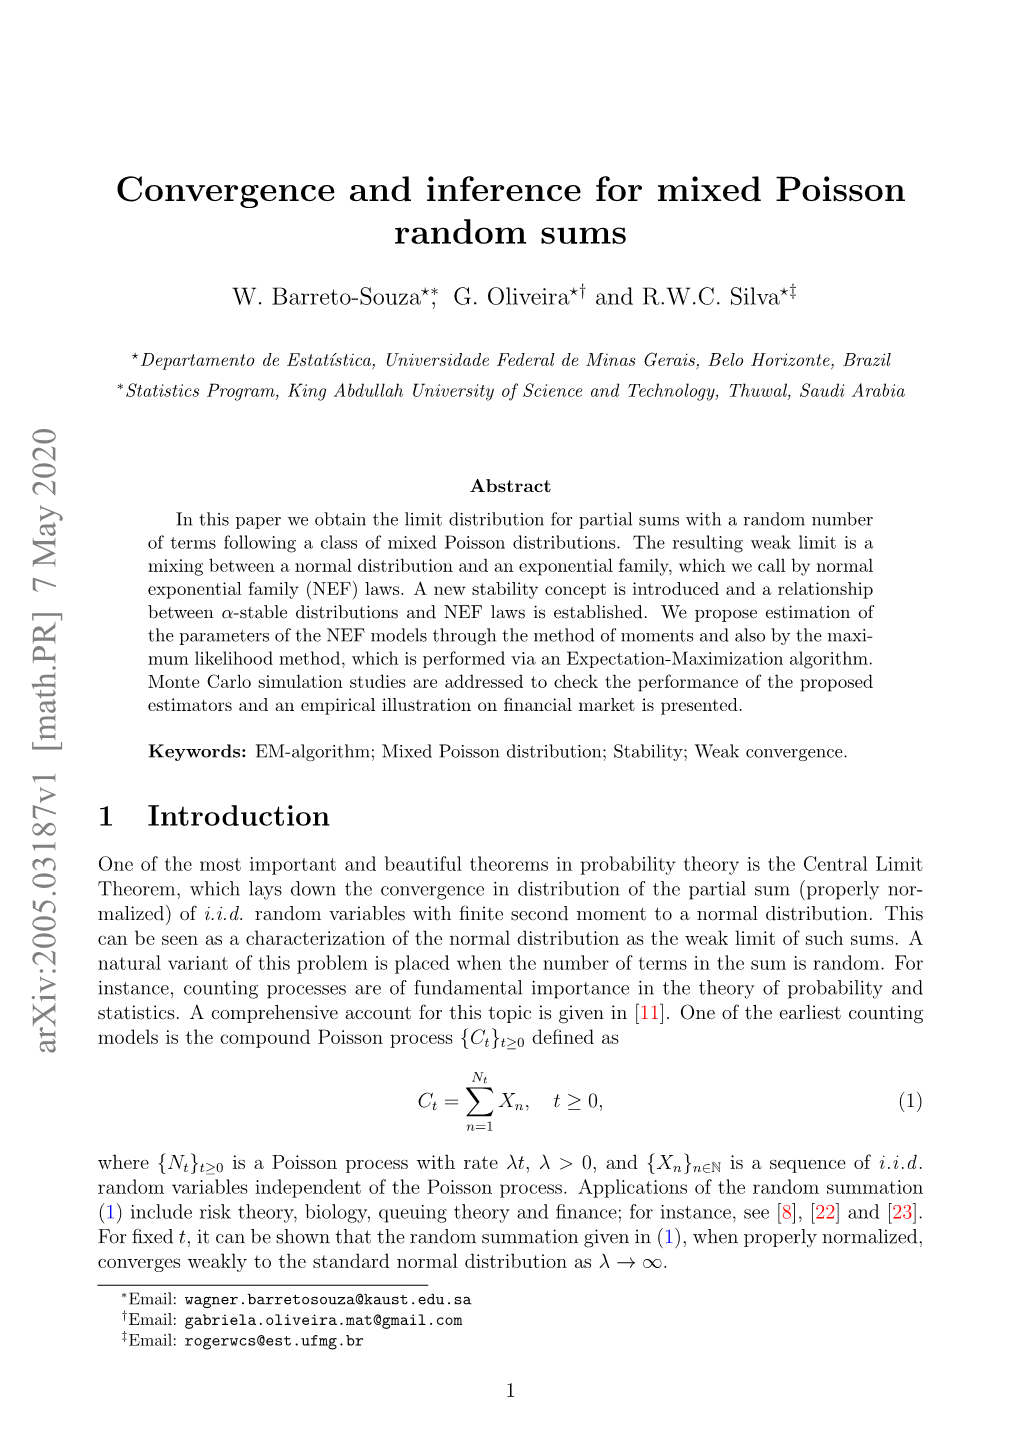 Convergence and Inference for Mixed Poisson Random Sums